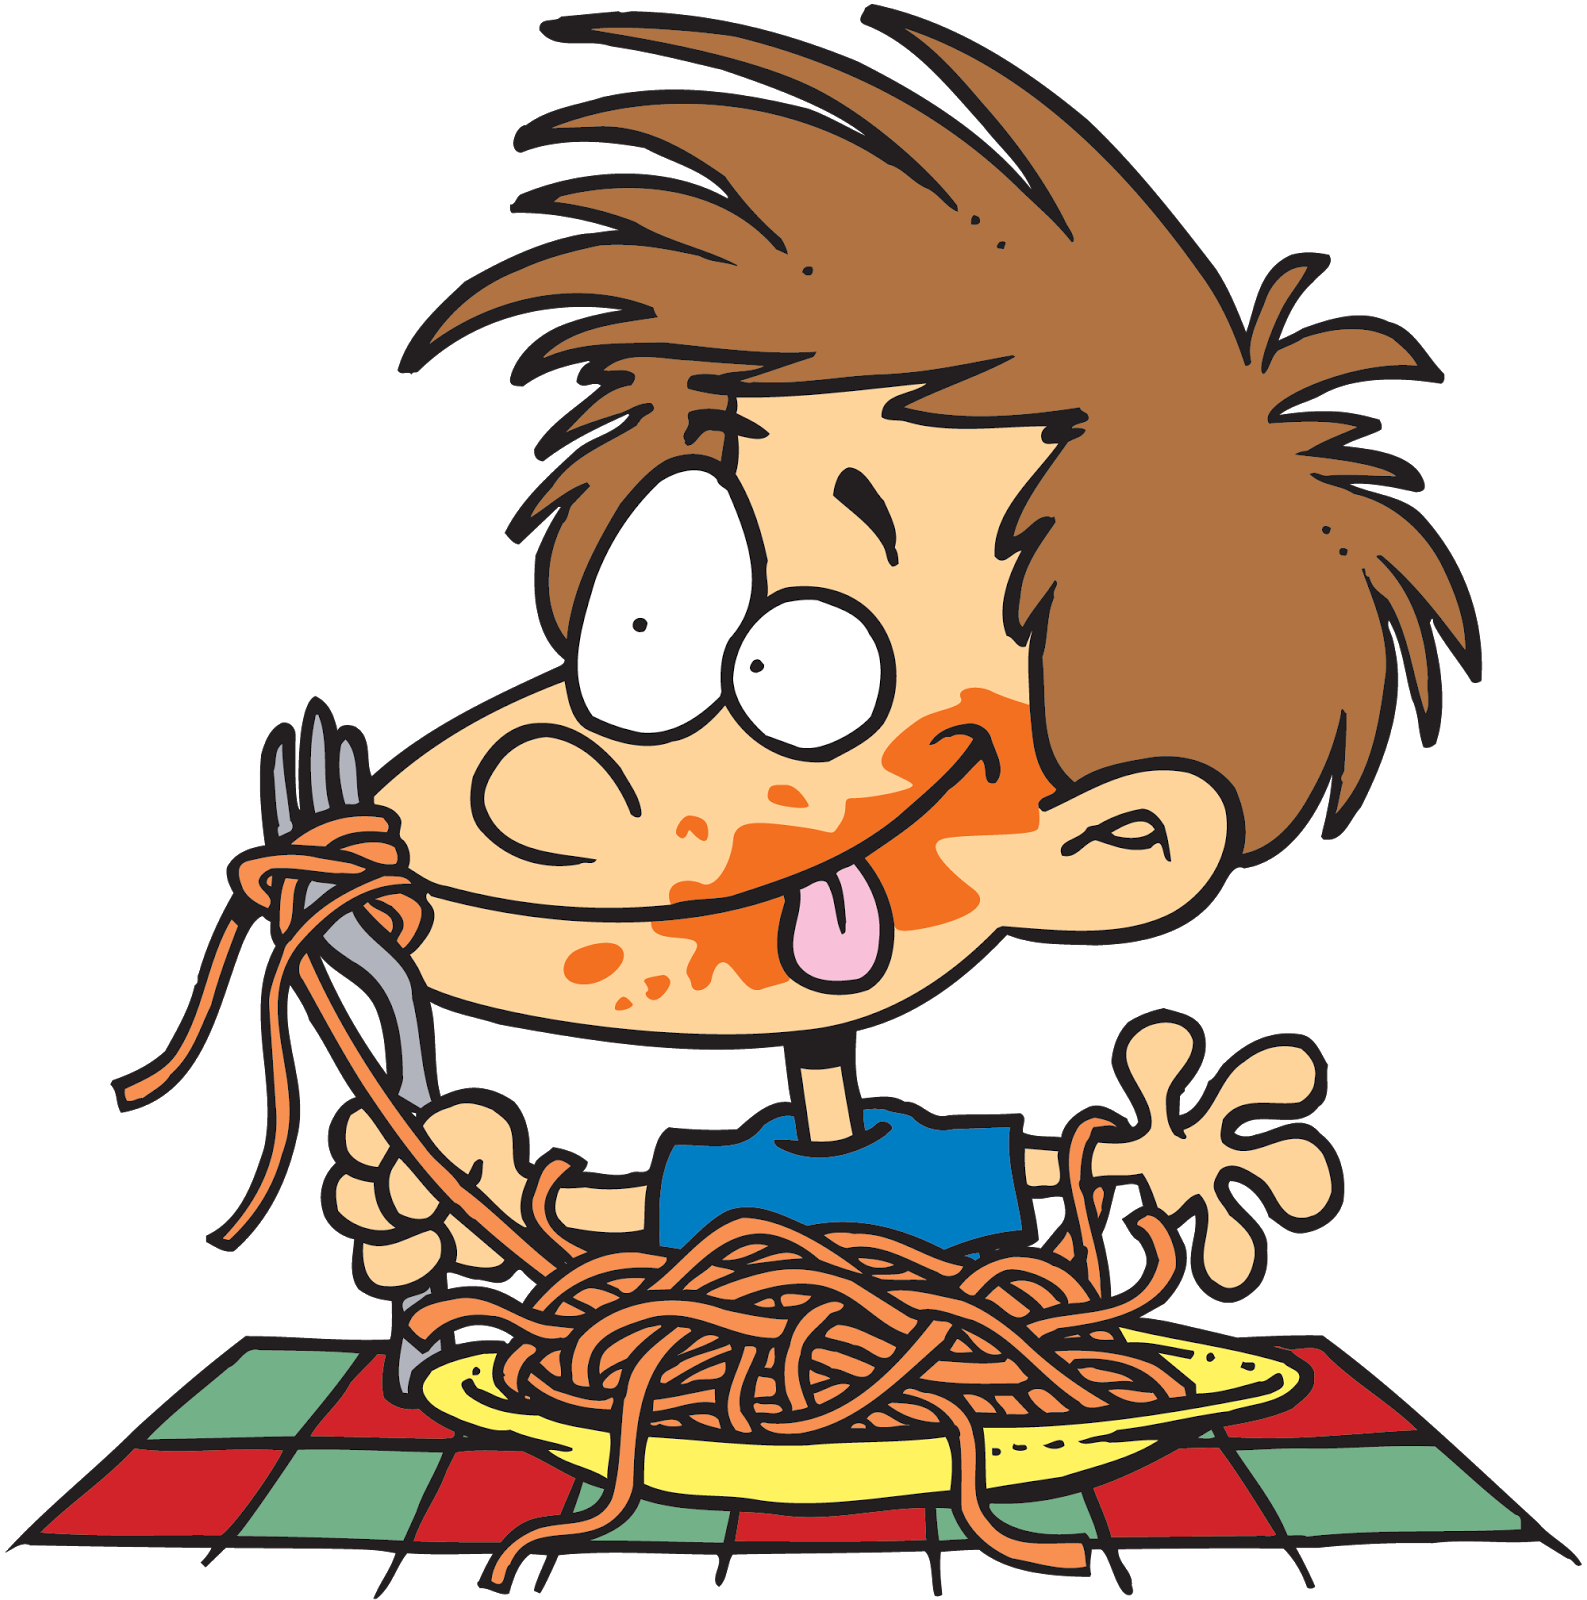 Free Cartoon Eating Pizza, Download Free Clip Art, Free Clip Art on ...